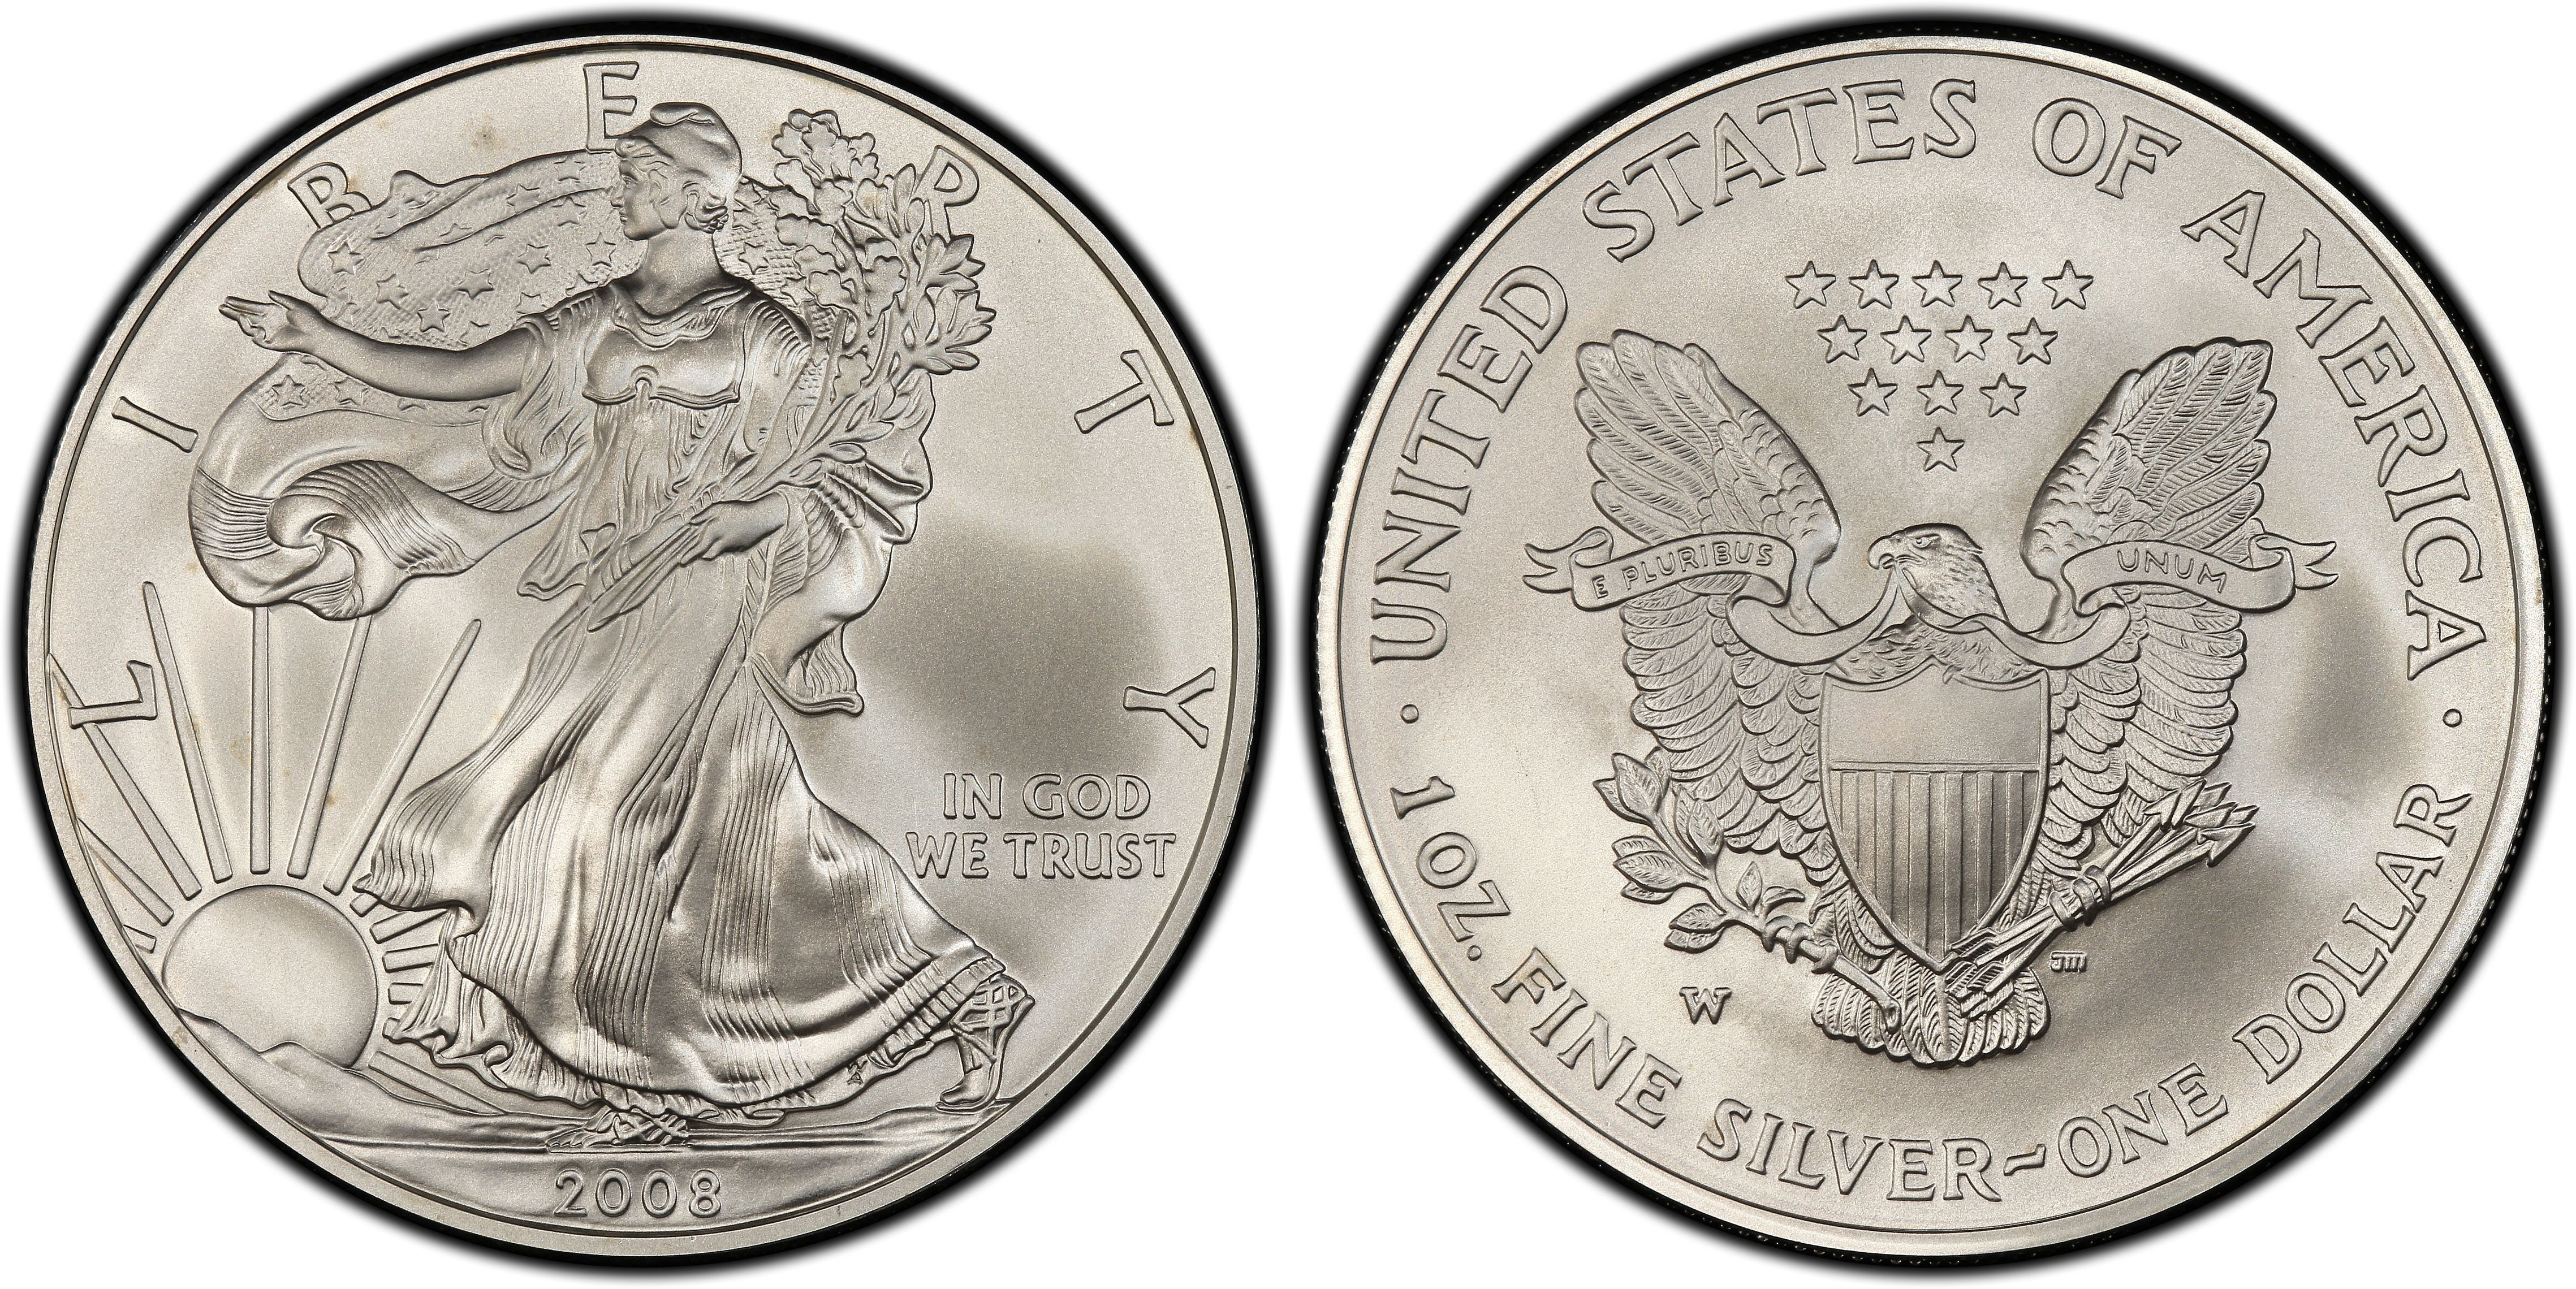 Images of Silver Eagles 2008-W $1 Burnished Silver Eagle Reverse of